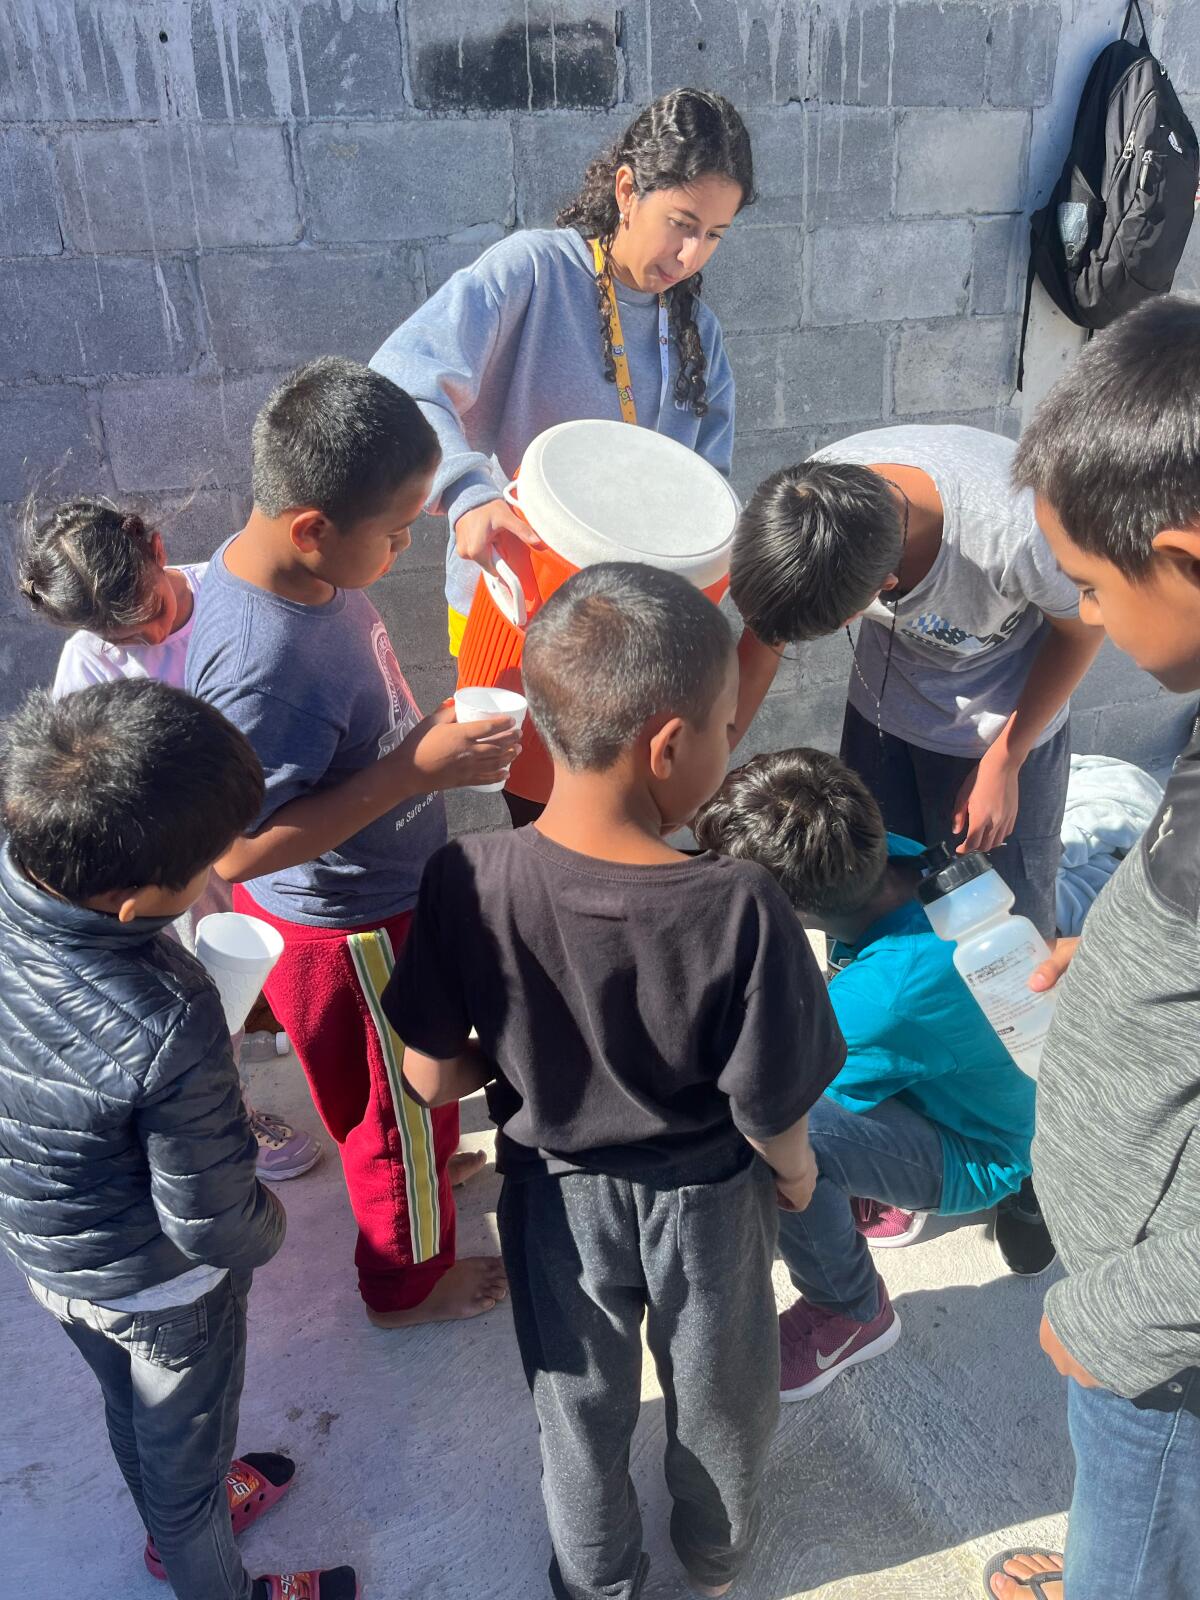 Kayleen, one of the local iACT coaches, during a water break at a immigrant shelter.